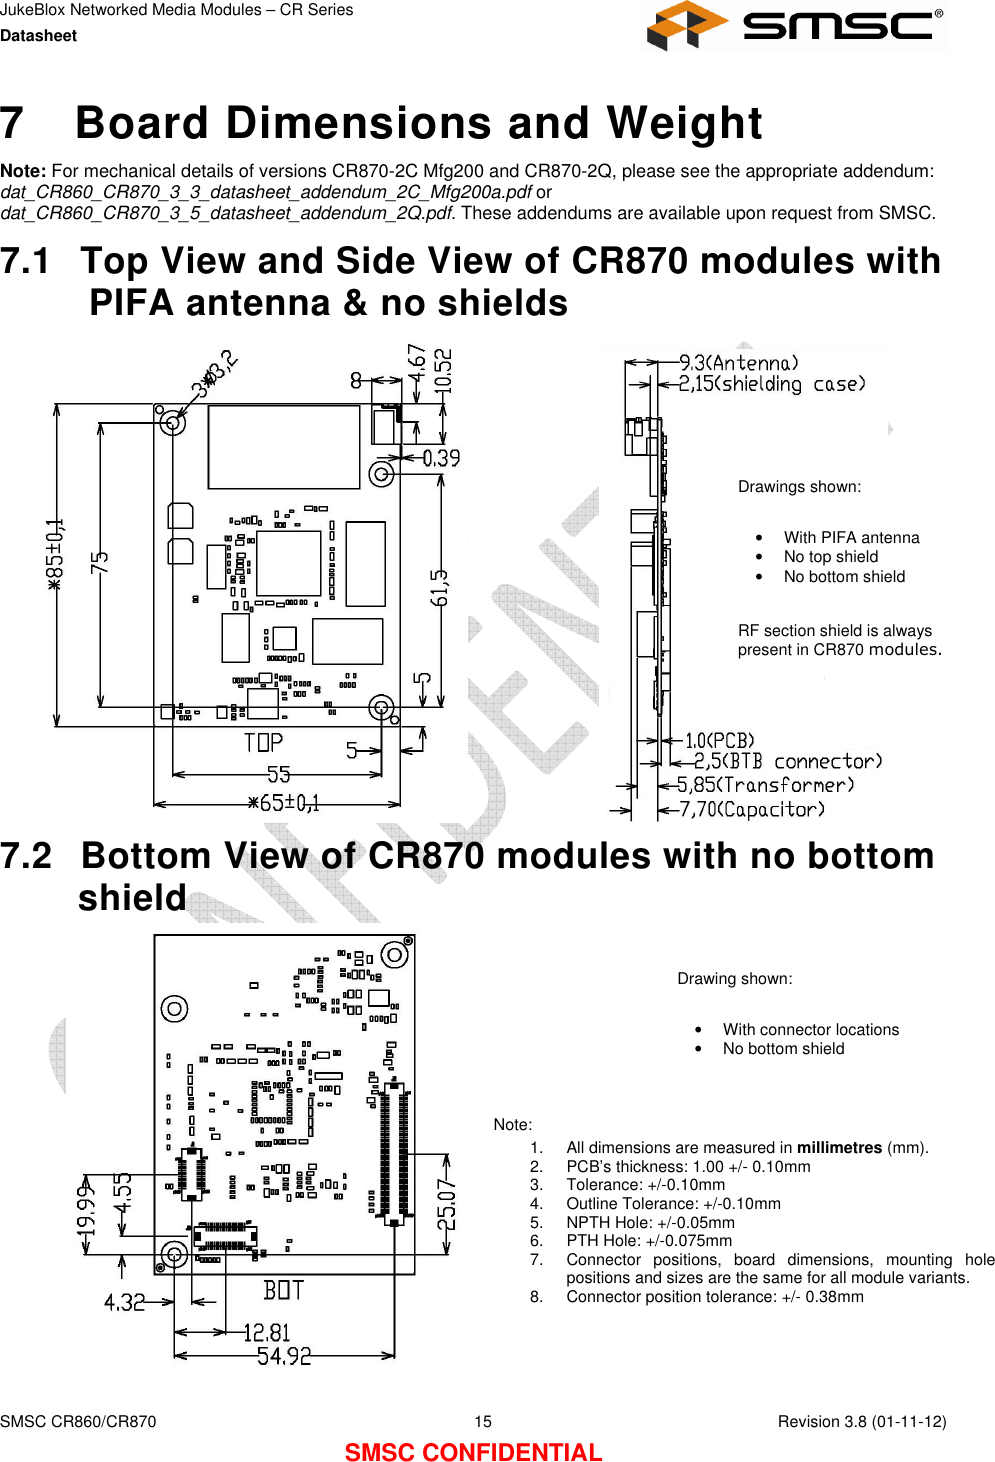 JukeBlox Networked Media Modules – CR Series Datasheet    SMSC CR860/CR870  15    Revision 3.8 (01-11-12) SMSC CONFIDENTIAL 7  Board Dimensions and Weight Note: For mechanical details of versions CR870-2C Mfg200 and CR870-2Q, please see the appropriate addendum: dat_CR860_CR870_3_3_datasheet_addendum_2C_Mfg200a.pdf or dat_CR860_CR870_3_5_datasheet_addendum_2Q.pdf. These addendums are available upon request from SMSC. 7.1  Top View and Side View of CR870 modules with PIFA antenna &amp; no shields                7.2  Bottom View of CR870 modules with no bottom shield              Note: 1.  All dimensions are measured in millimetres (mm). 2.  PCB’s thickness: 1.00 +/- 0.10mm 3.  Tolerance: +/-0.10mm 4.  Outline Tolerance: +/-0.10mm 5.  NPTH Hole: +/-0.05mm 6.  PTH Hole: +/-0.075mm 7.  Connector  positions,  board  dimensions,  mounting  hole positions and sizes are the same for all module variants. 8.  Connector position tolerance: +/- 0.38mm Drawings shown:  •  With PIFA antenna •  No top shield •  No bottom shield   RF section shield is always present in CR870 modules. Drawing shown:  •  With connector locations •  No bottom shield 